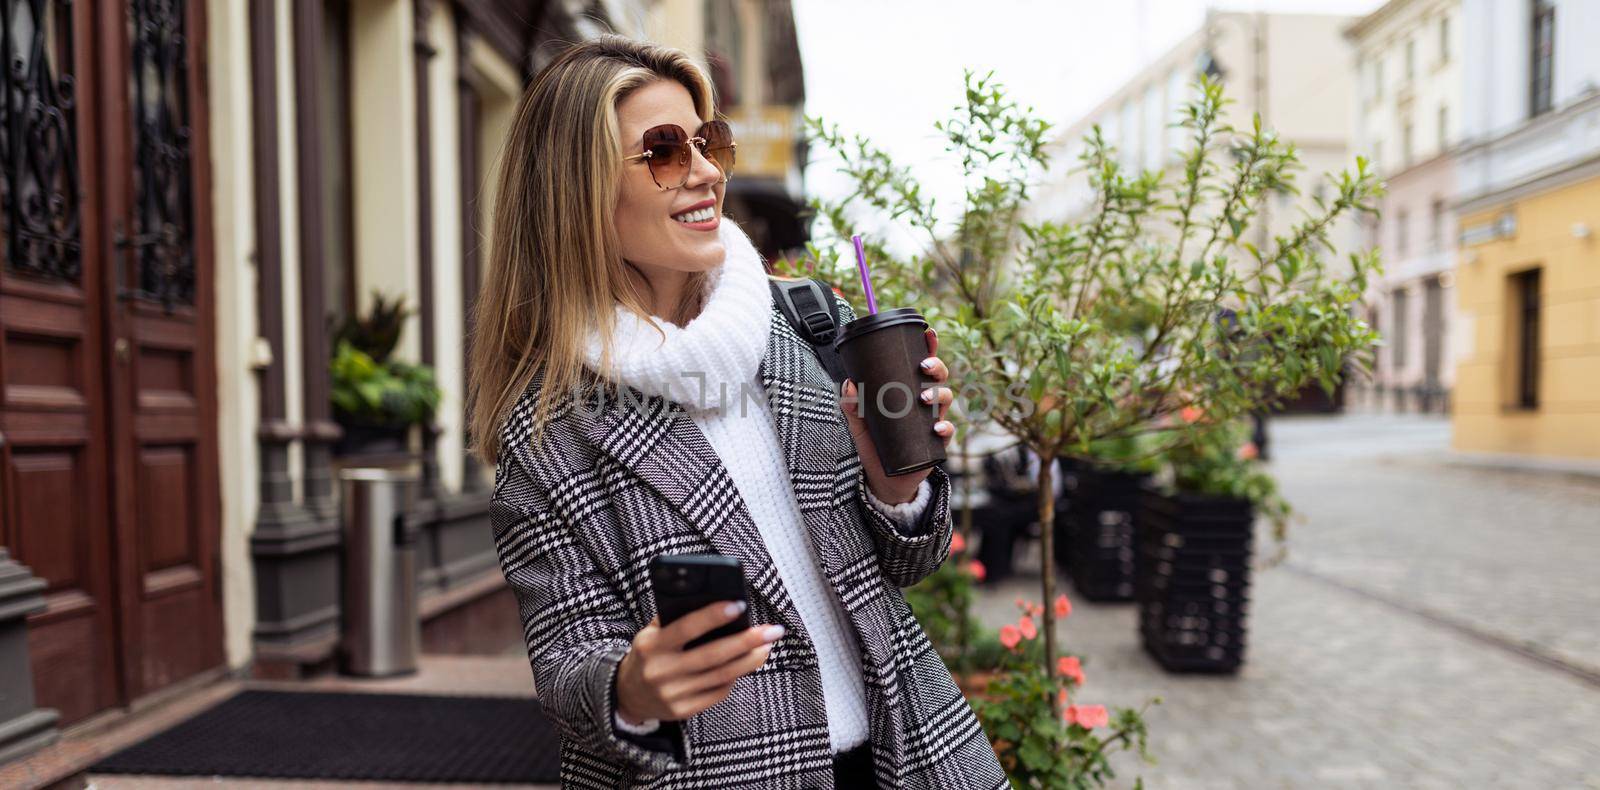 woman Tourist walks around the city sightseeing with a cup of coffee and a mobile phone.